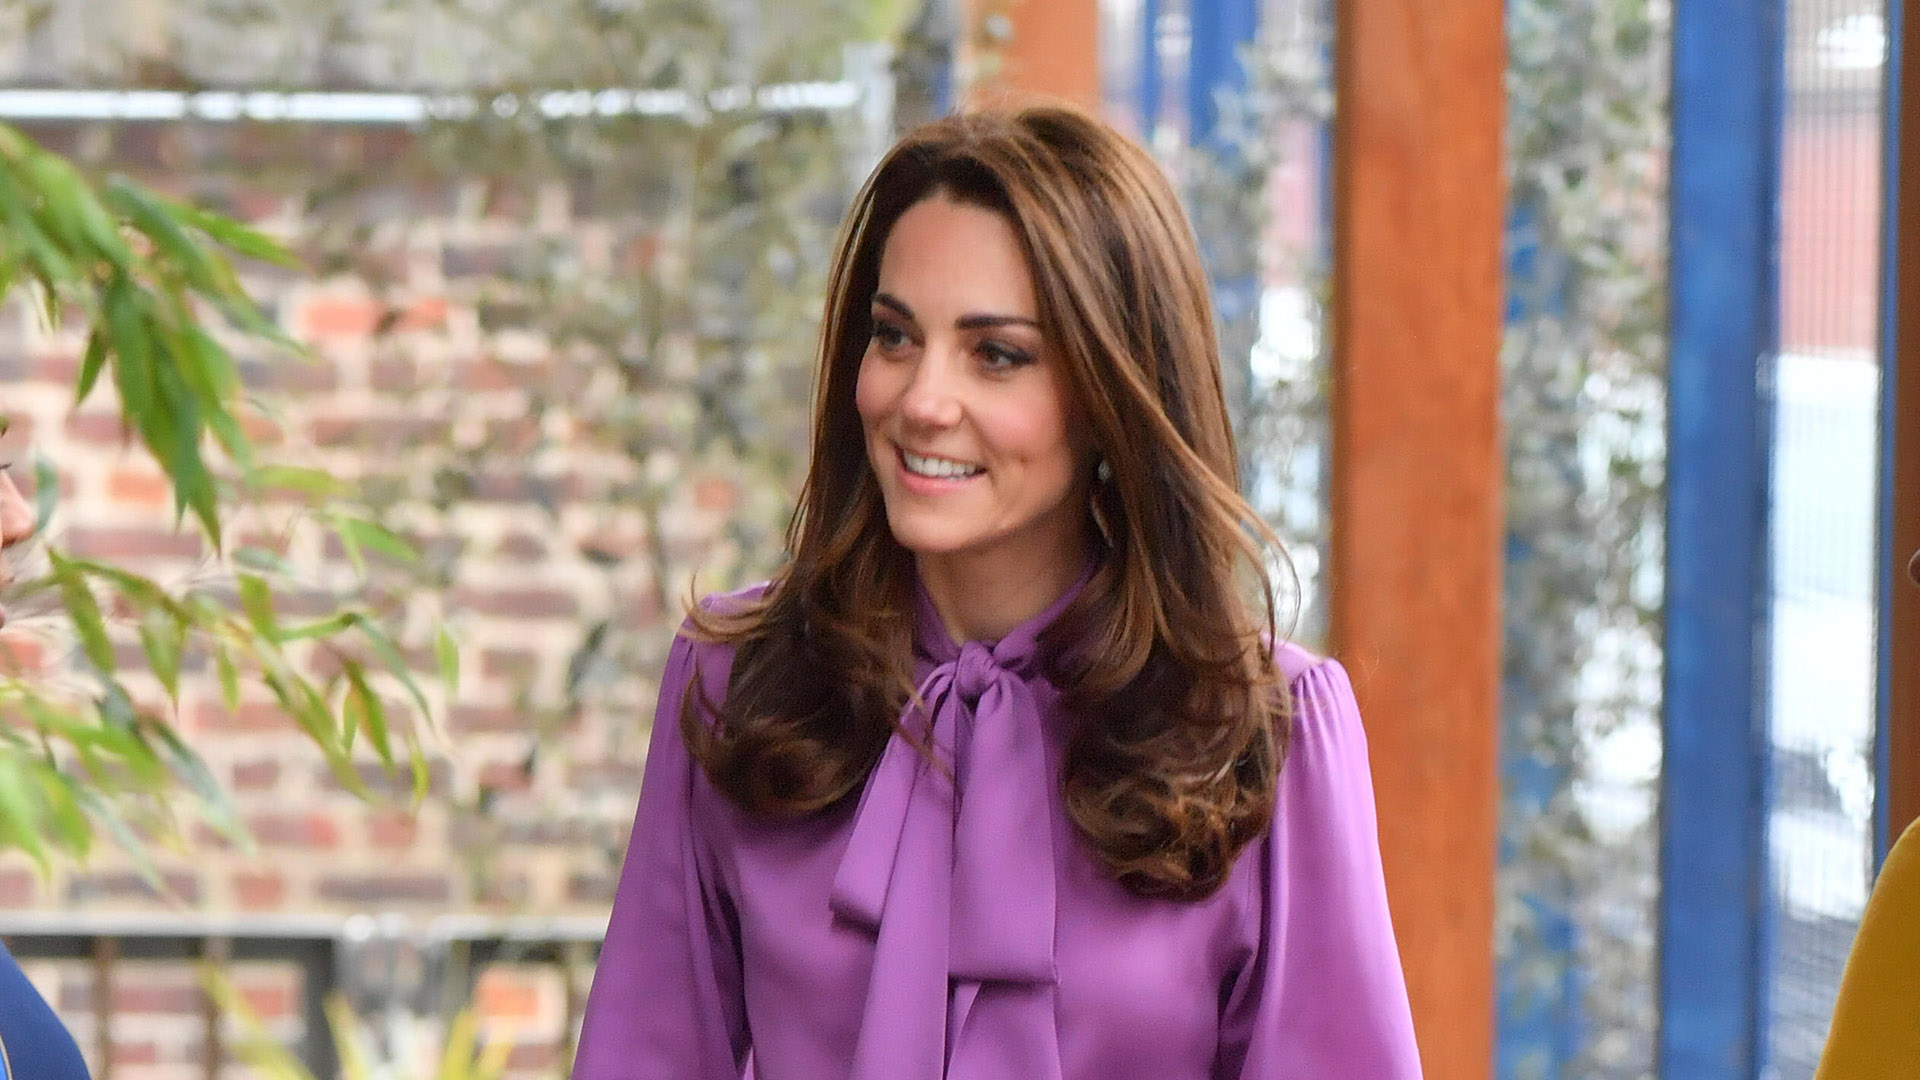 The Duchess' Fashion Must-Haves: 5 Items Kate Middleton Can't Live Without